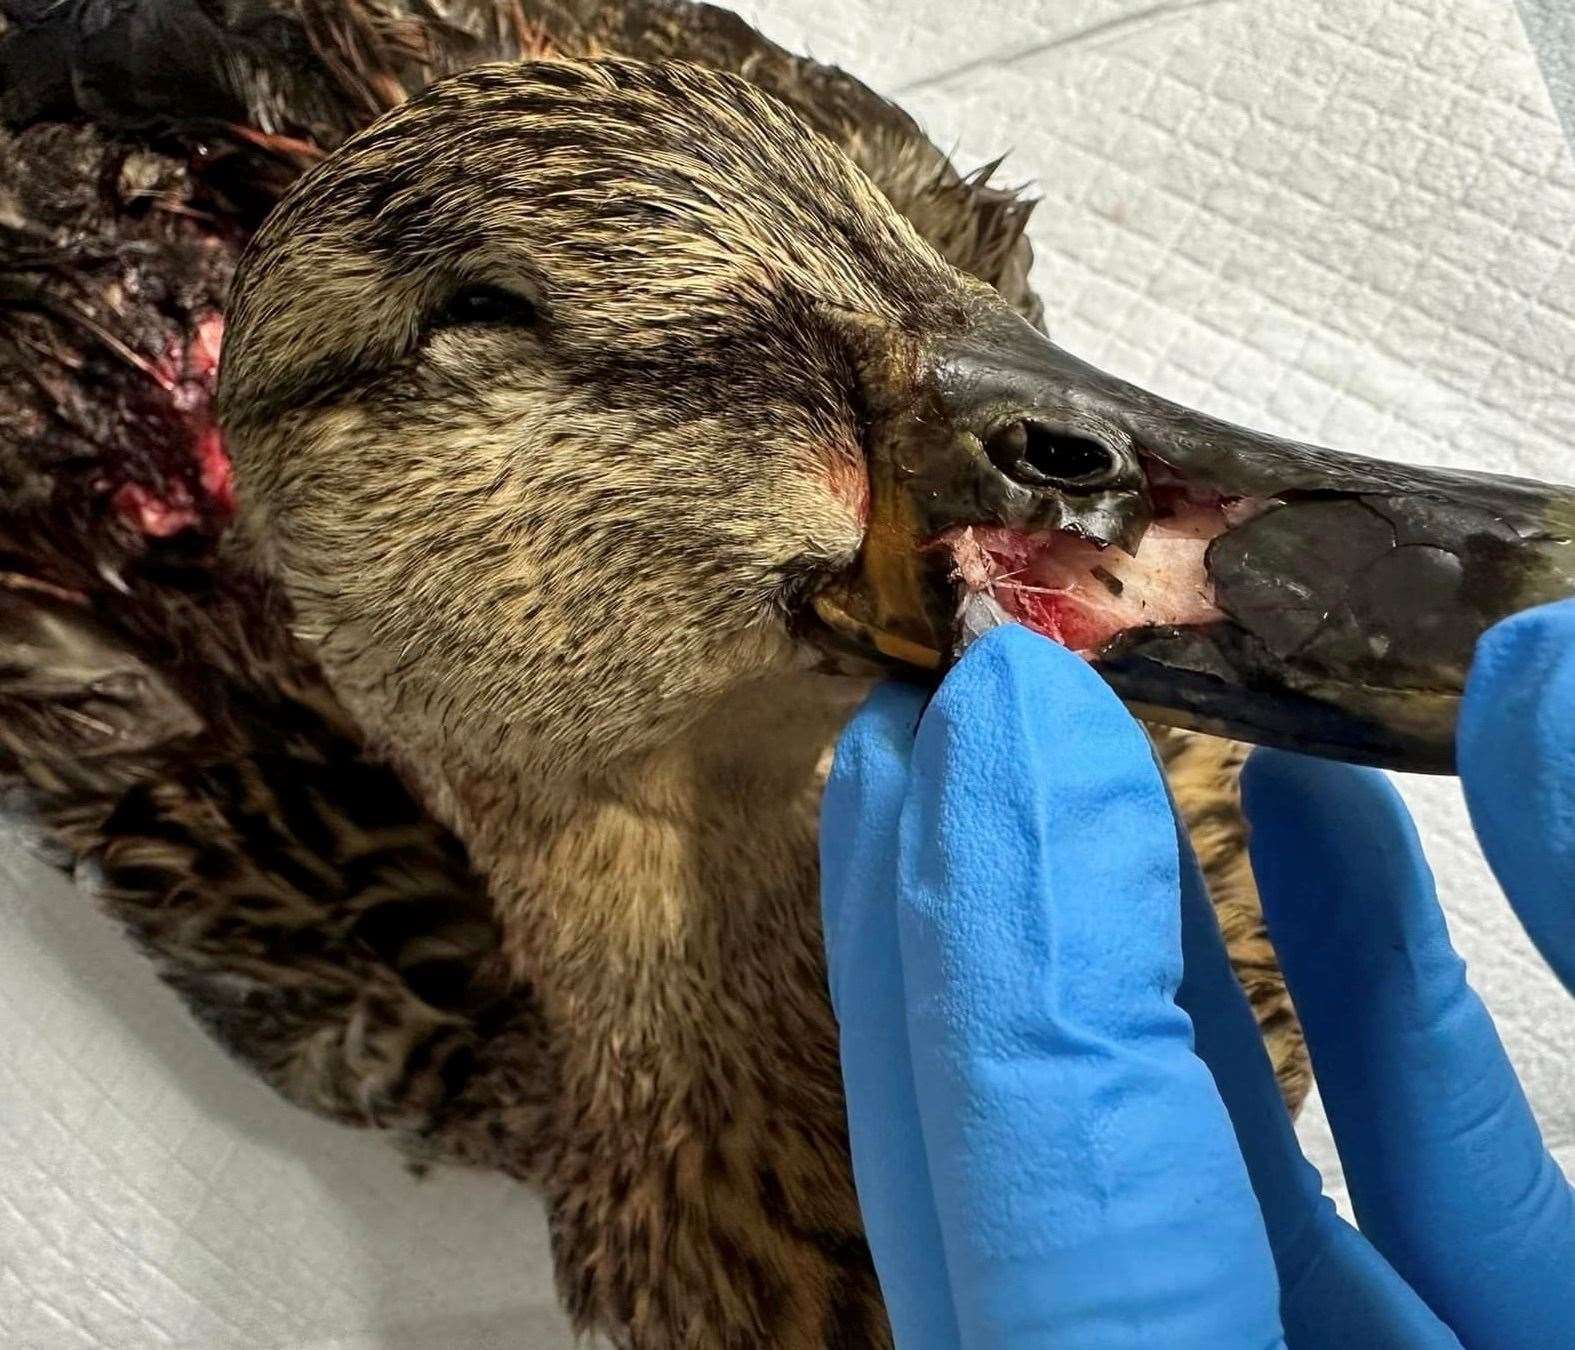 The duck's beak was shattered in the catapult attack. Picture: Columbines Wildlife Care